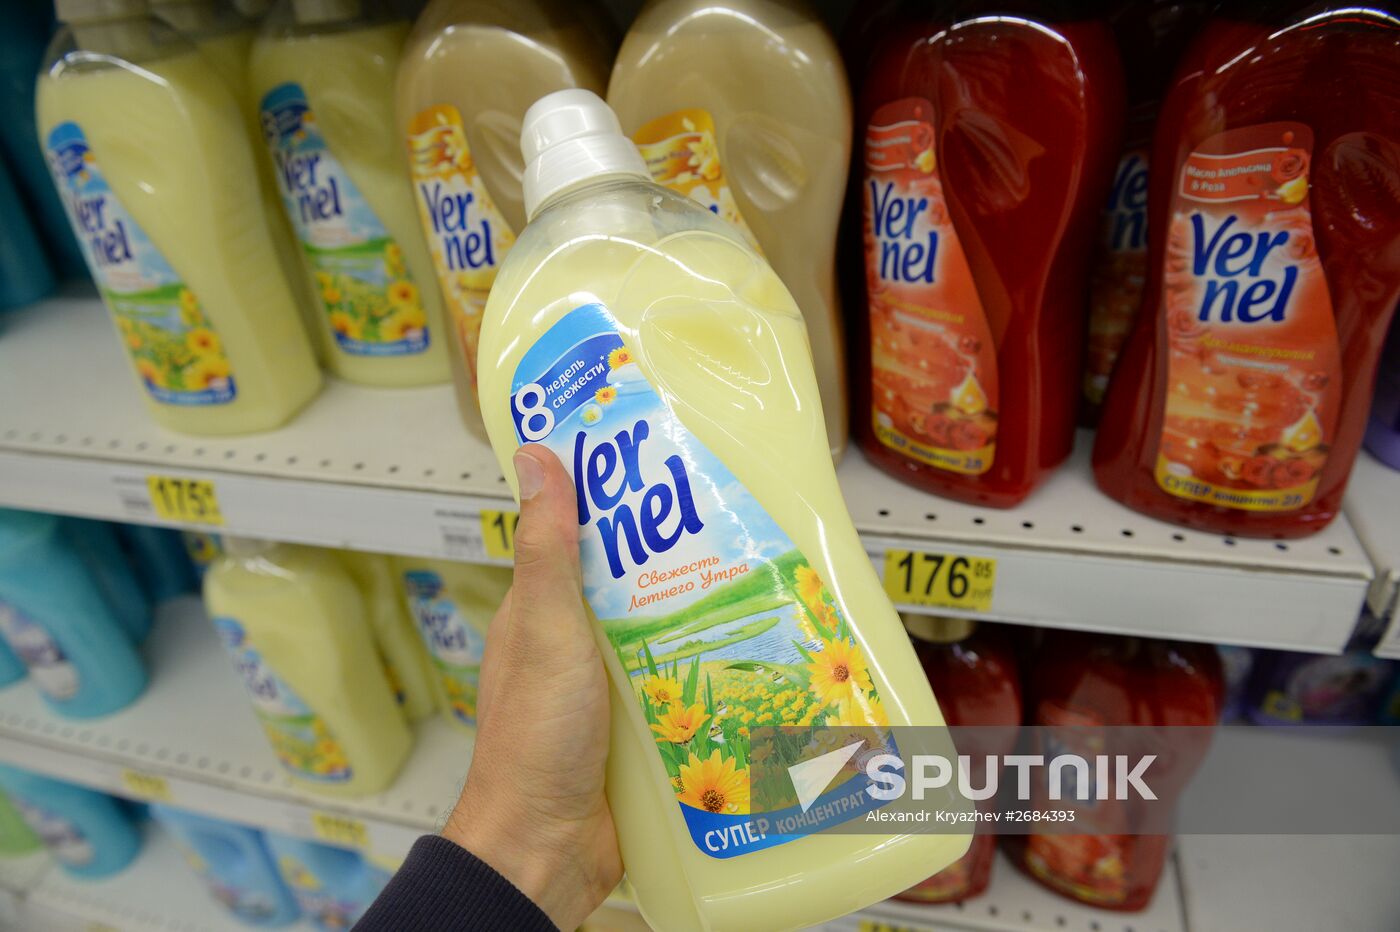 Rospotrebnadzor ordered to discontinue sales of some imported cleansers